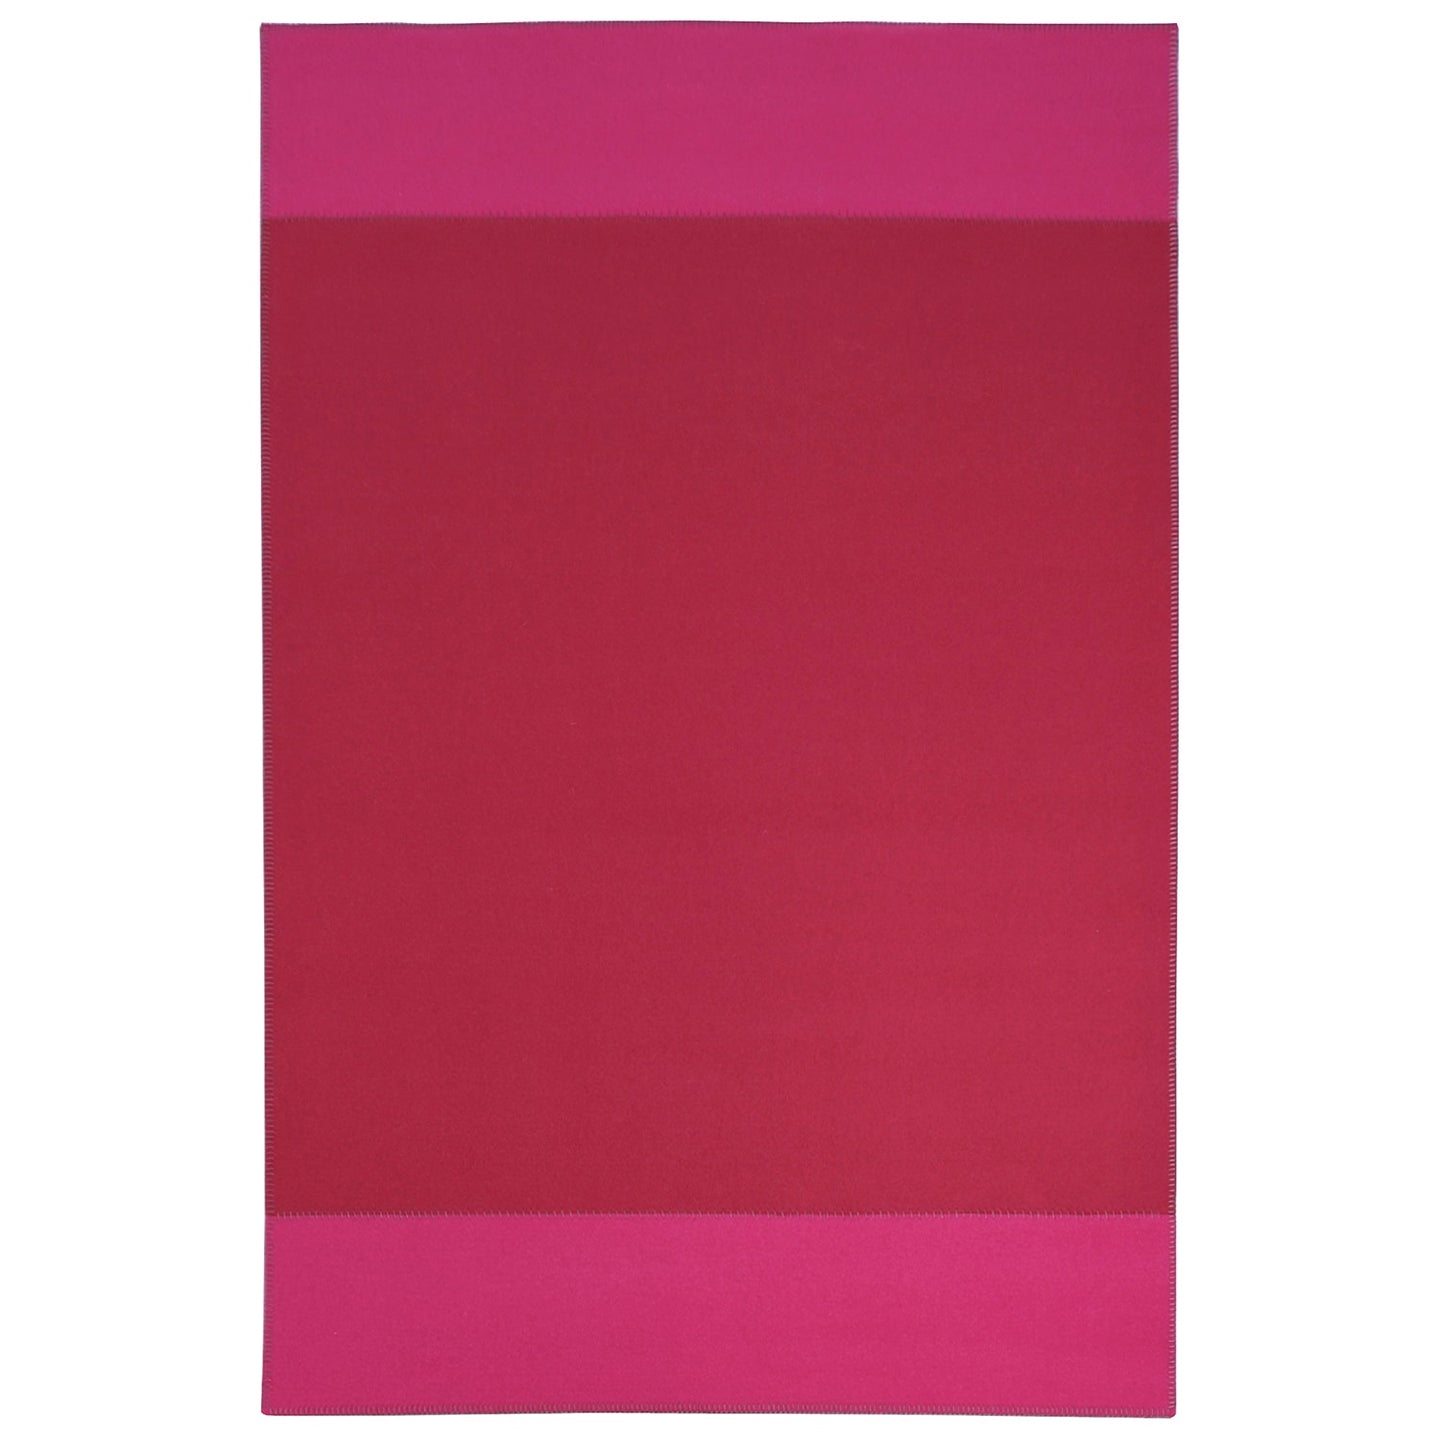 Hugo Tapis Rug, Raspberry & Bright Pink rug by Roger Oates for AUTHOR